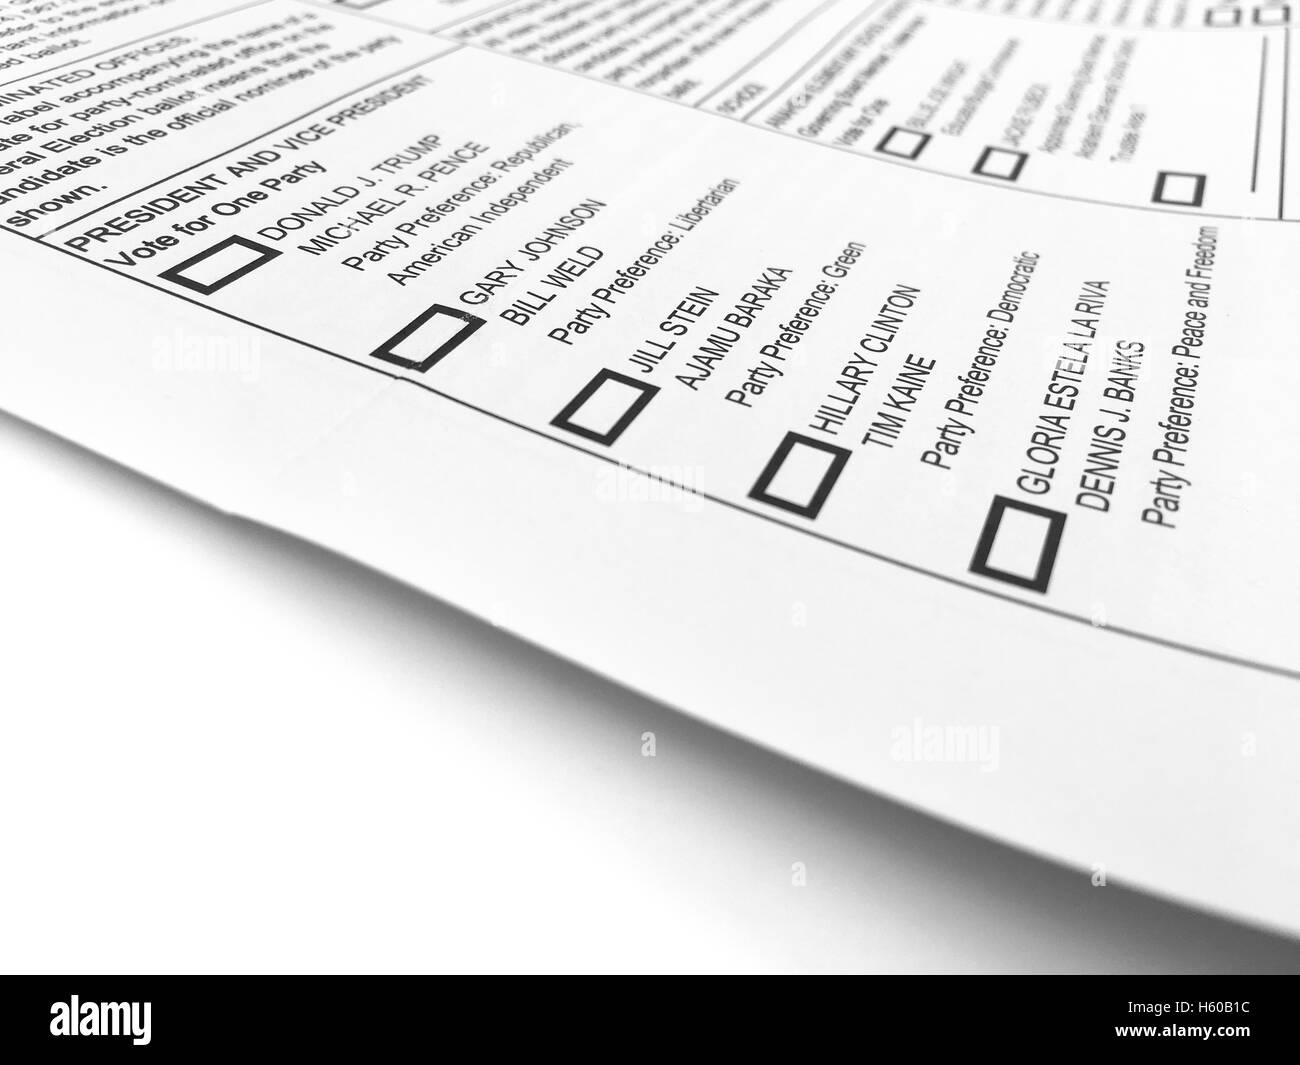 Orange County, CA, USA - October 1, 2016: General election ballot form with the listed U.S. presidential candidates. Stock Photo